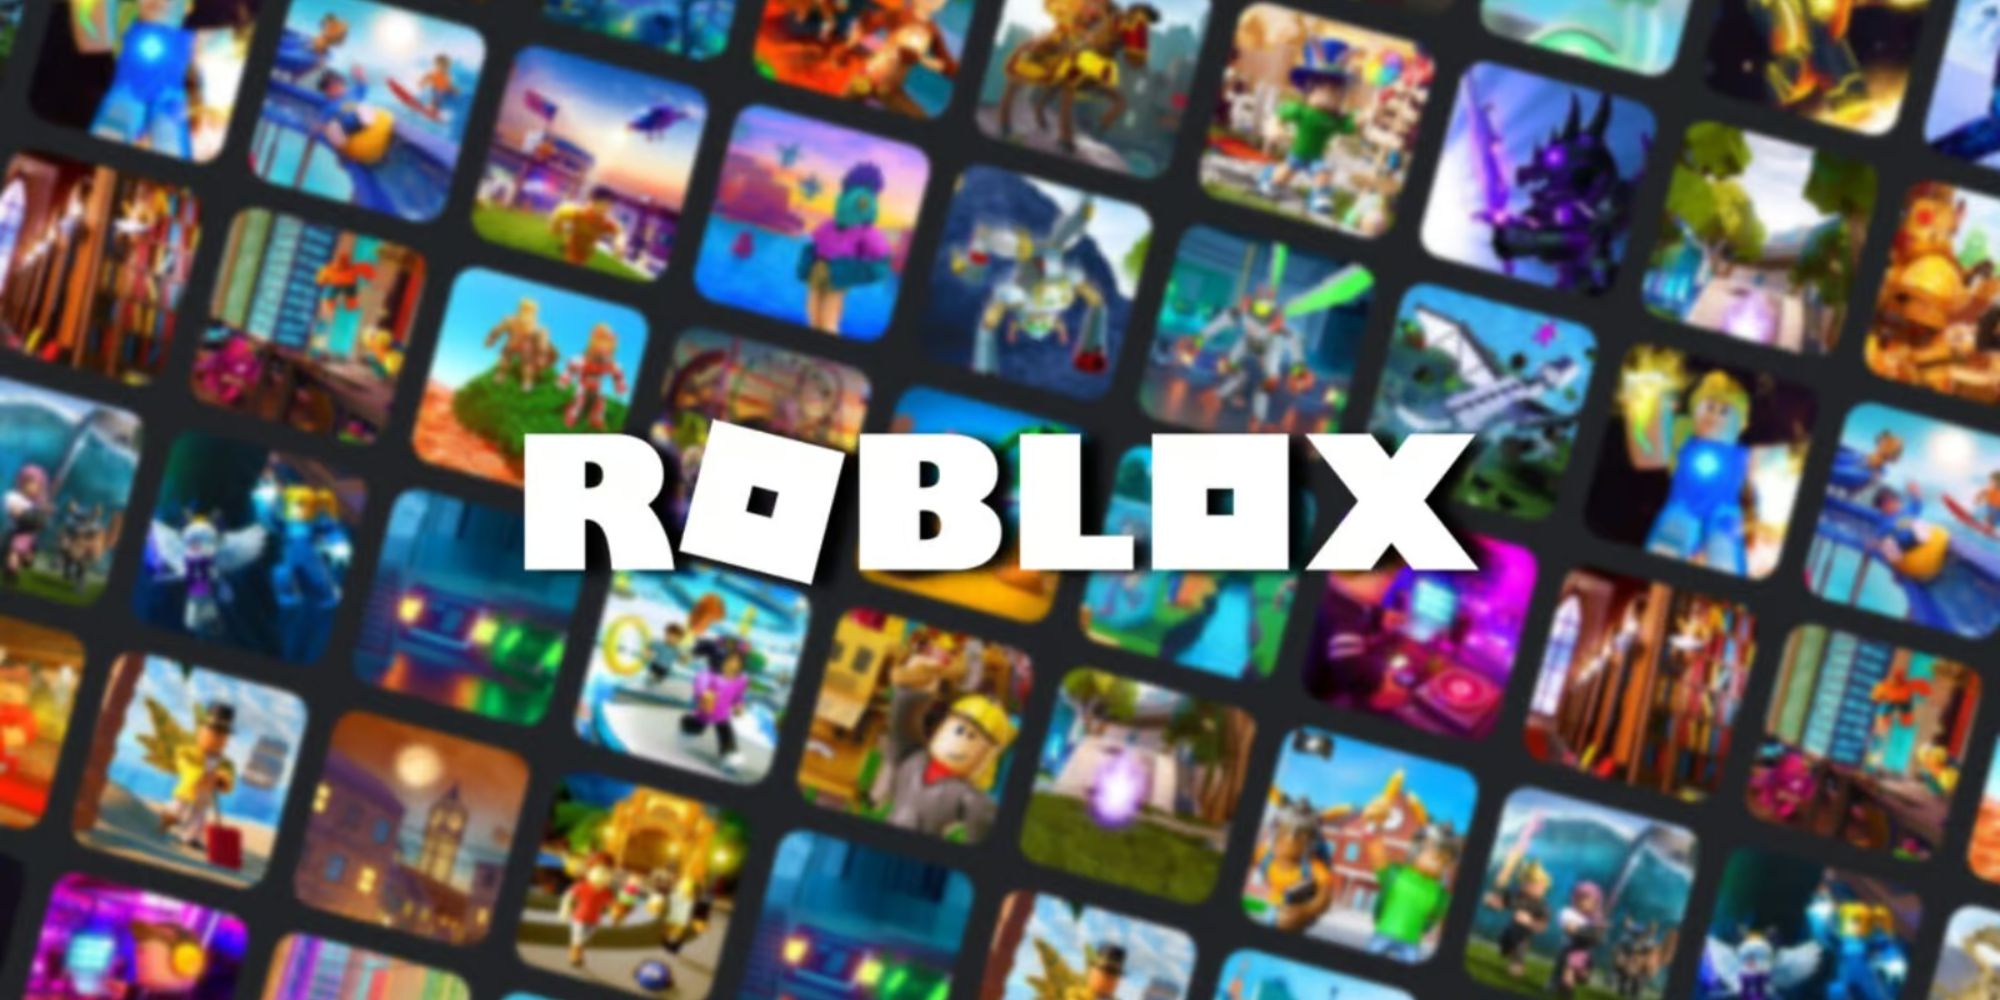 Today, @Roblox CEO Dave Baszucki announced that a number of remote